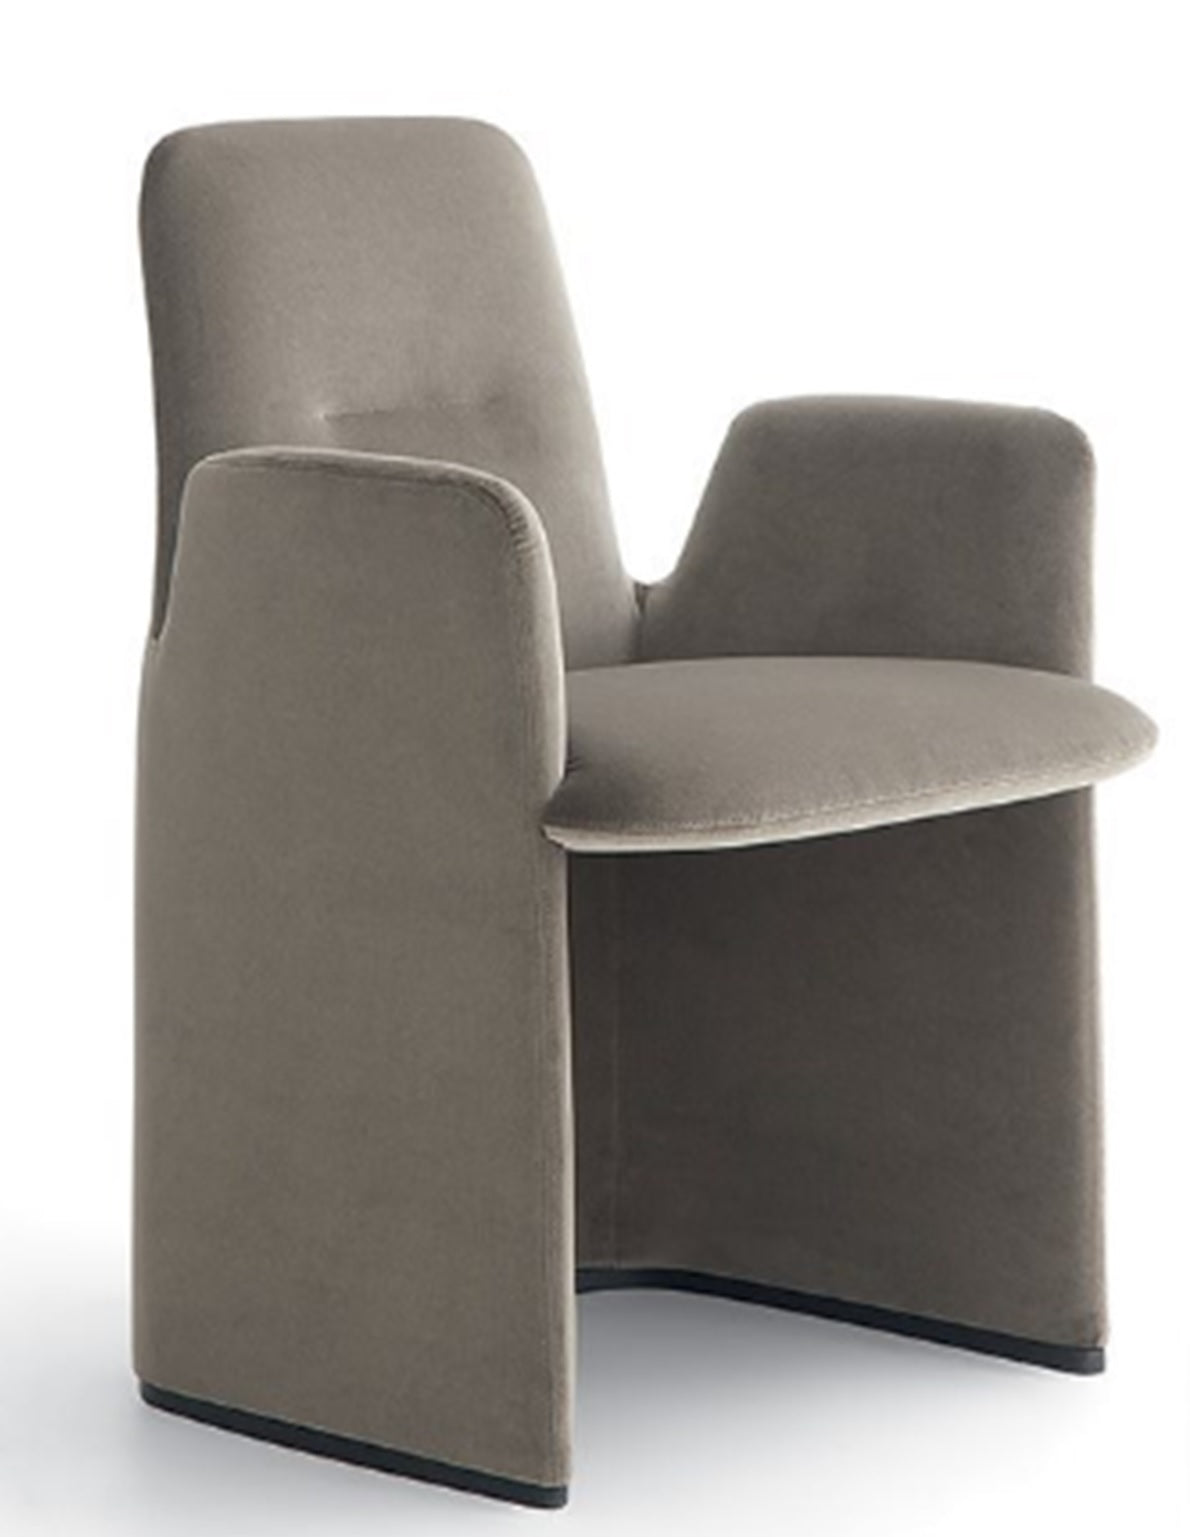 Guest Chair - Poliform - Mobica- The Mob Collective